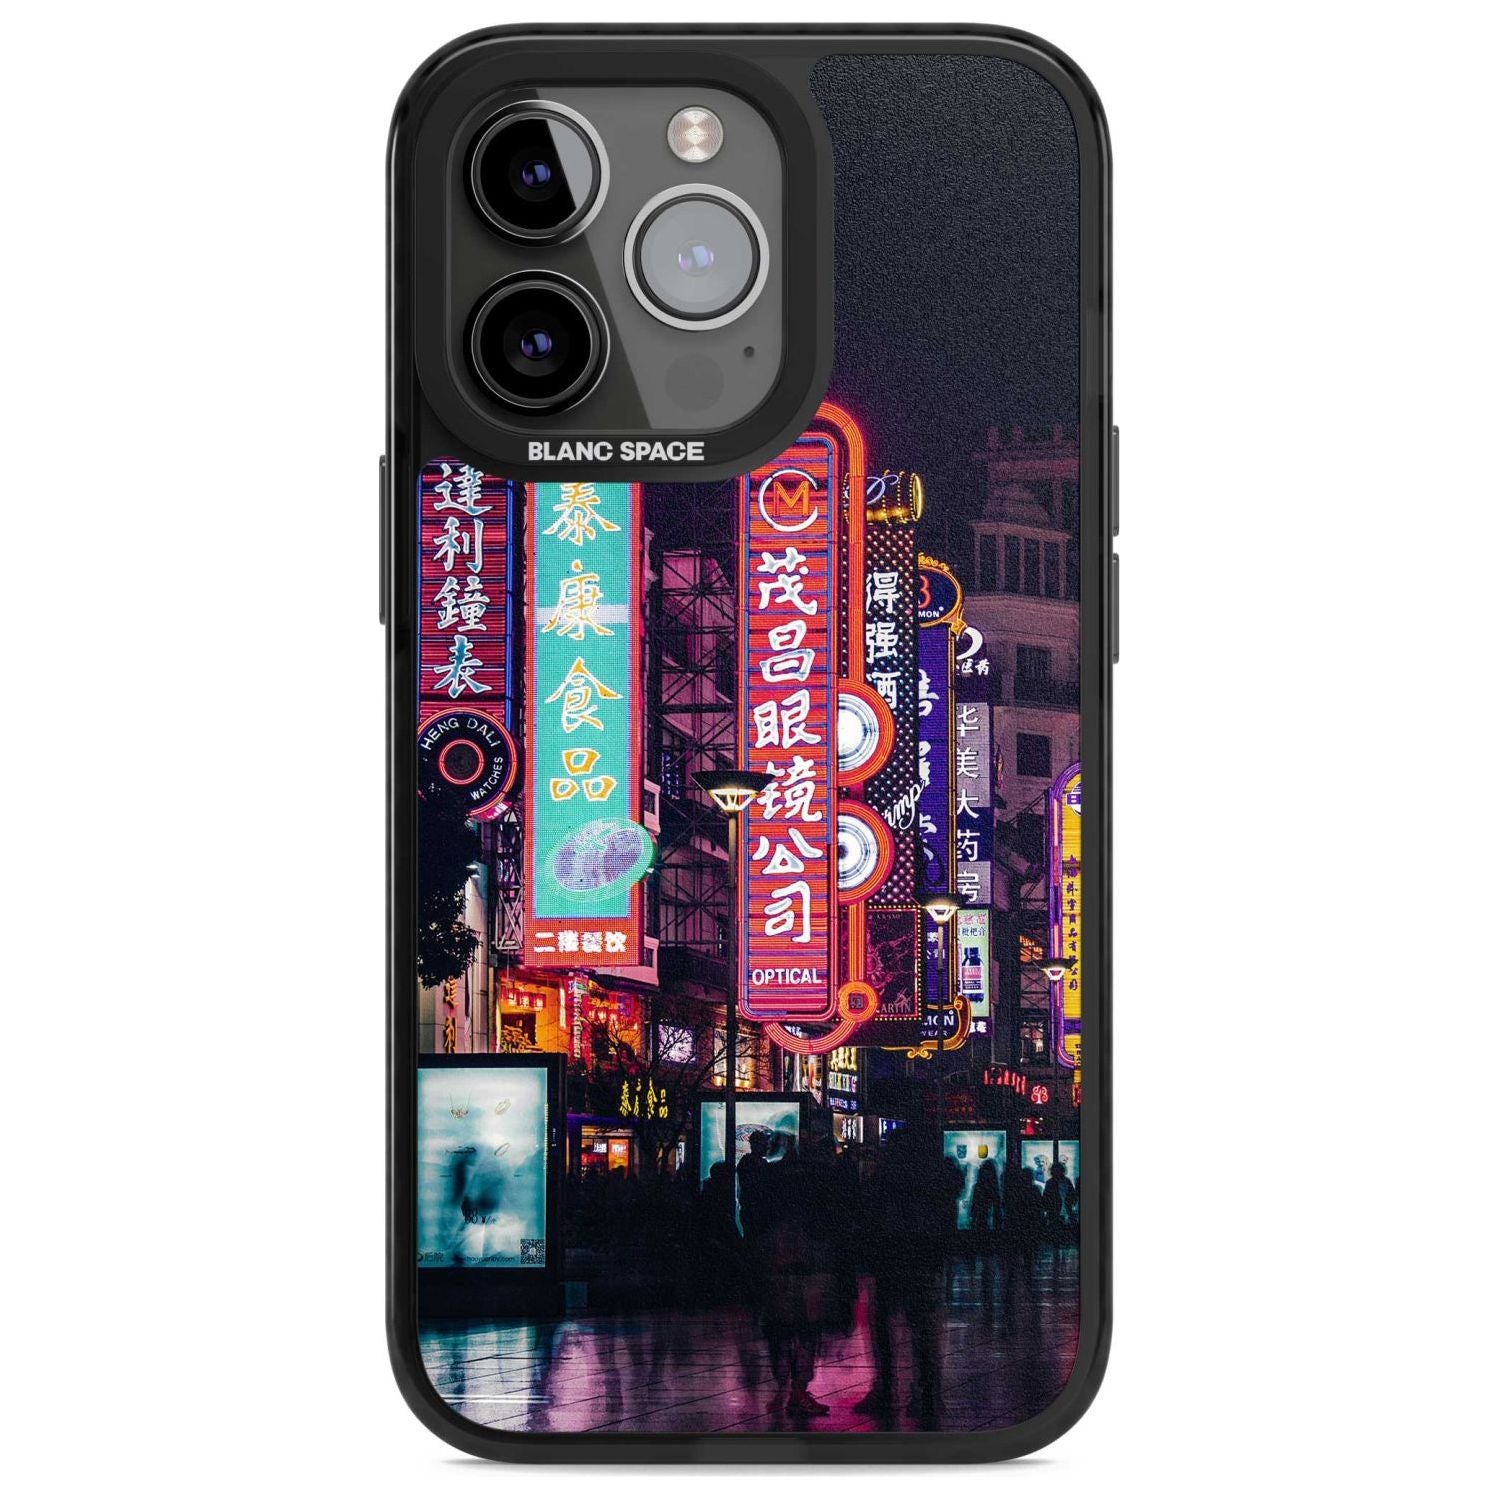 Busy Street - Neon Cities Photographs Phone Case iPhone 15 Pro Max / Magsafe Black Impact Case,iPhone 15 Pro / Magsafe Black Impact Case,iPhone 14 Pro Max / Magsafe Black Impact Case,iPhone 14 Pro / Magsafe Black Impact Case,iPhone 13 Pro / Magsafe Black Impact Case Blanc Space